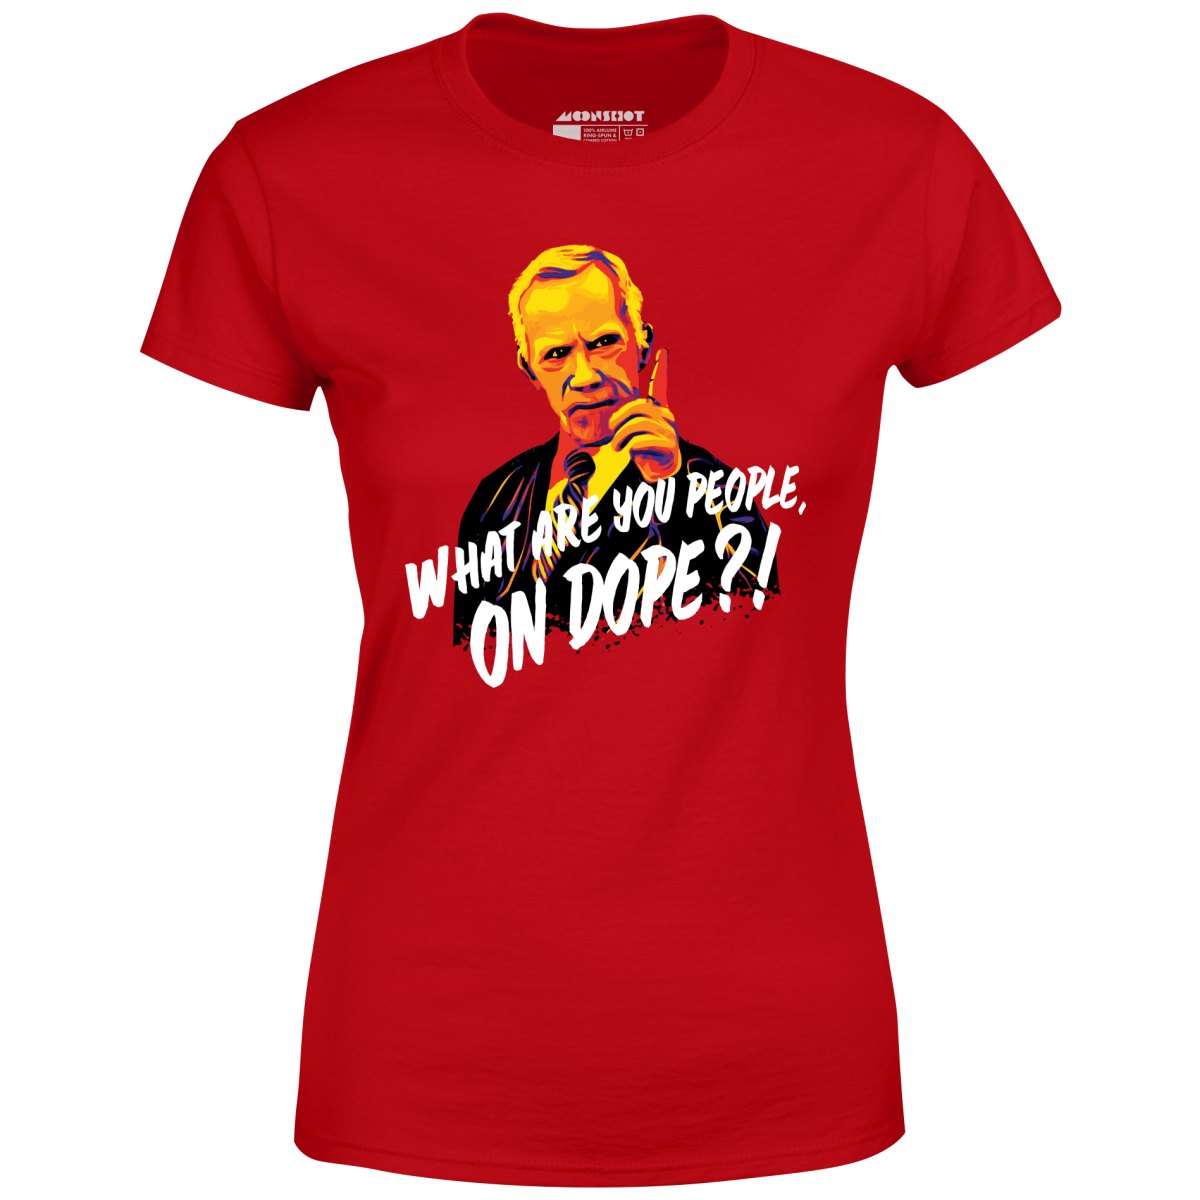 Mr. Hand - What Are You People, On Dope? - Women's T-Shirt